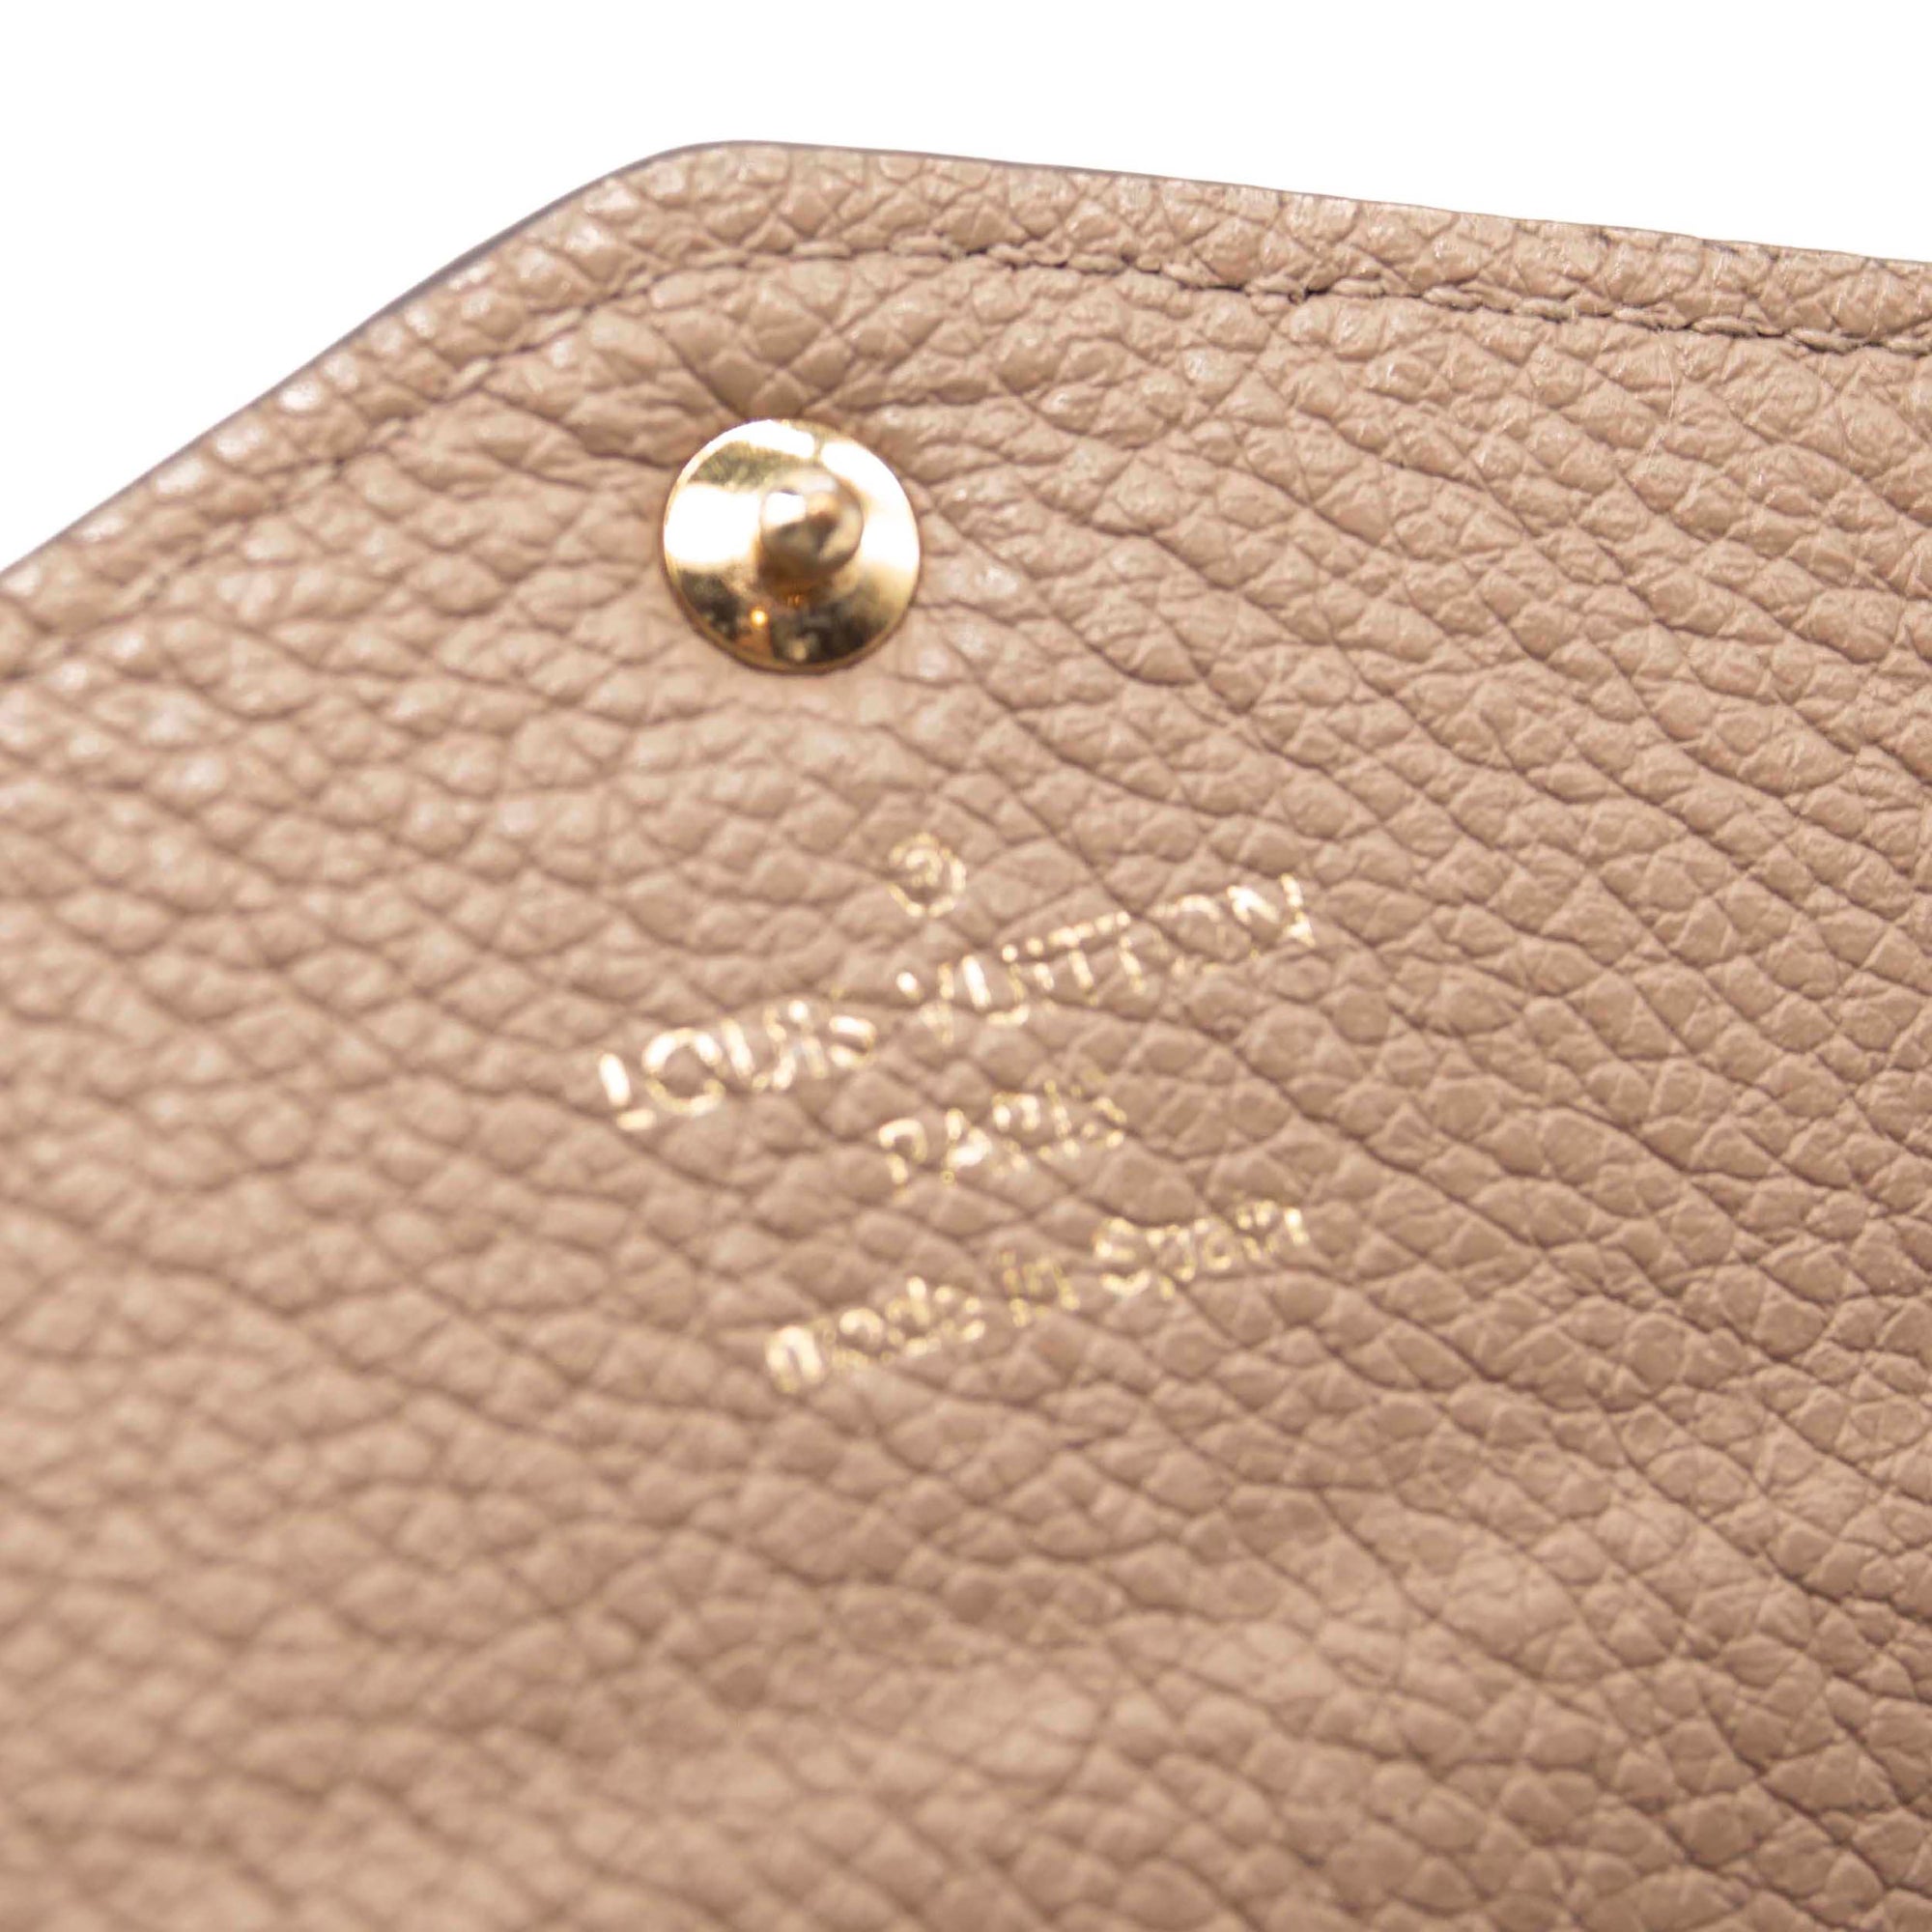 Sarah Wallet Monogram Empreinte Leather - Wallets and Small Leather Goods  M82516